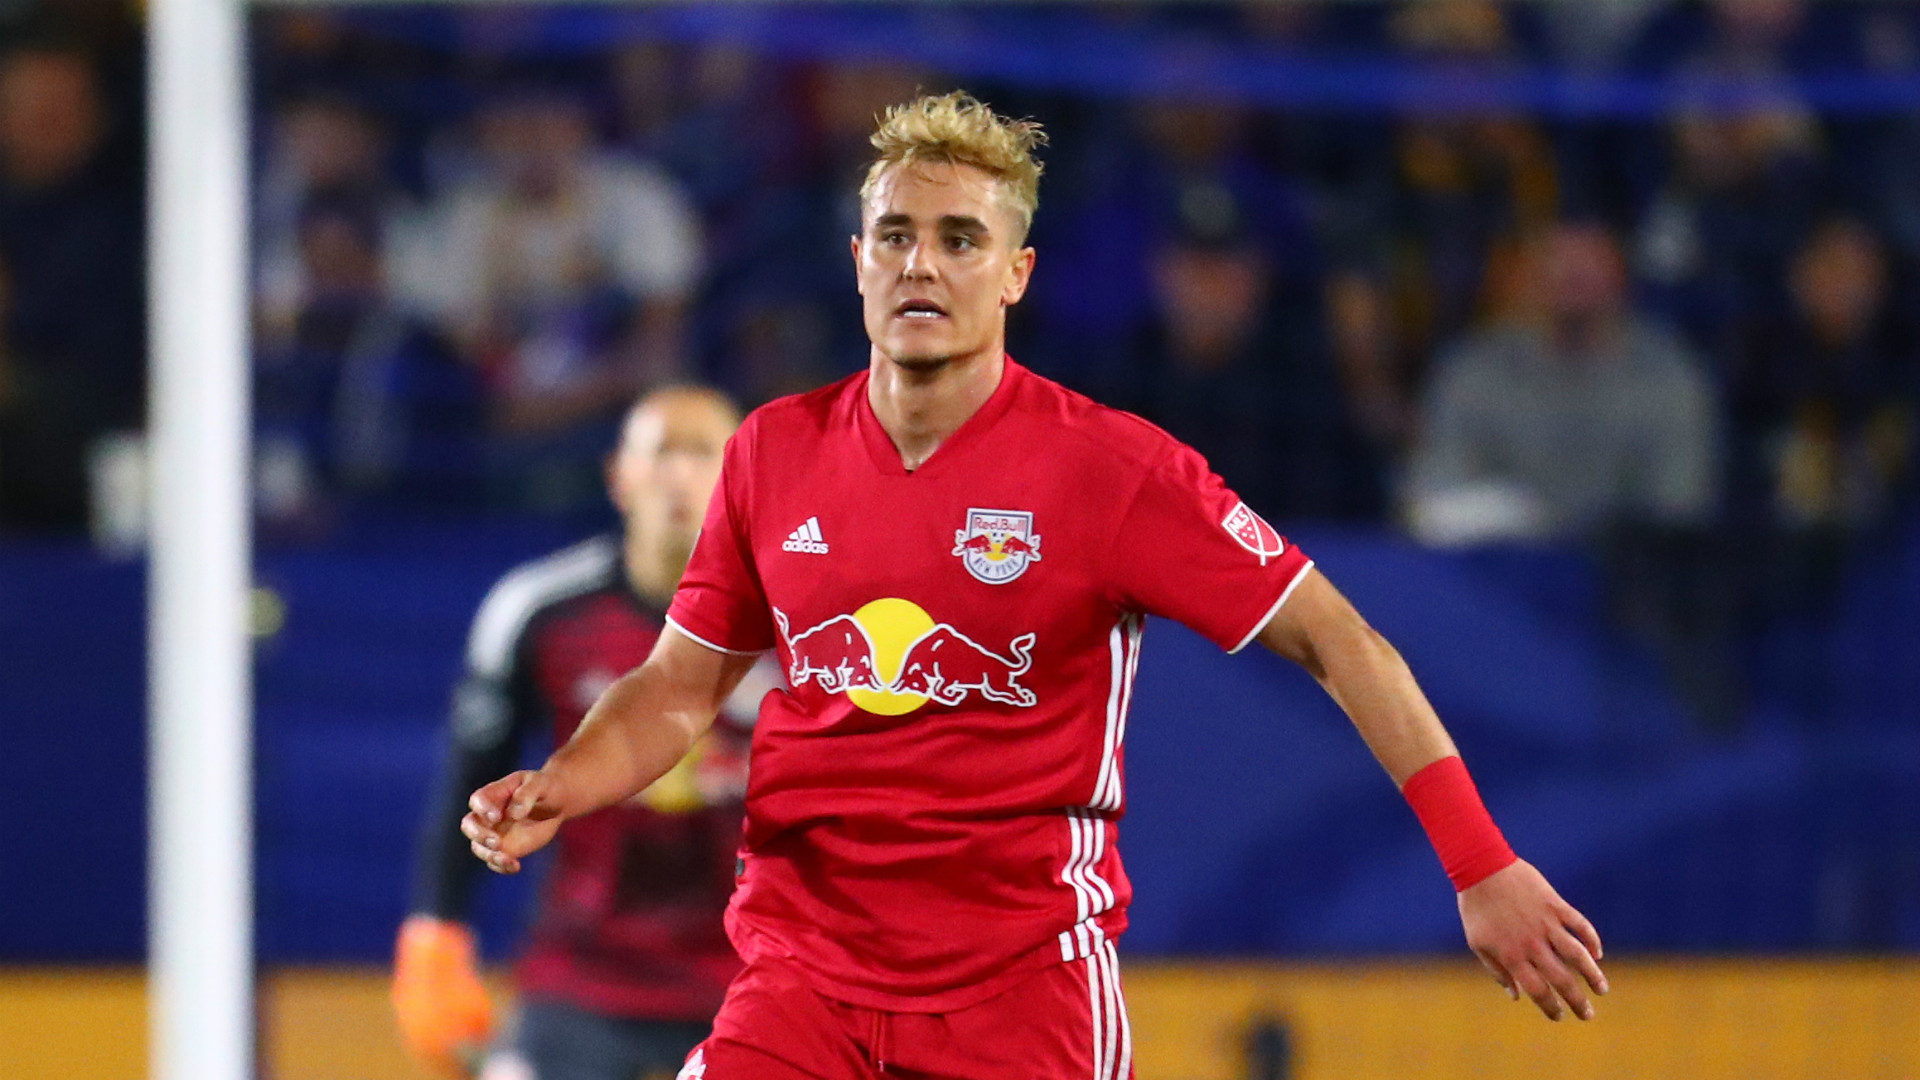 1920x1080 New York Red Bulls 2019 season preview: Roster, projected lineup, schedule, national TV and more | English Saudi Arabia